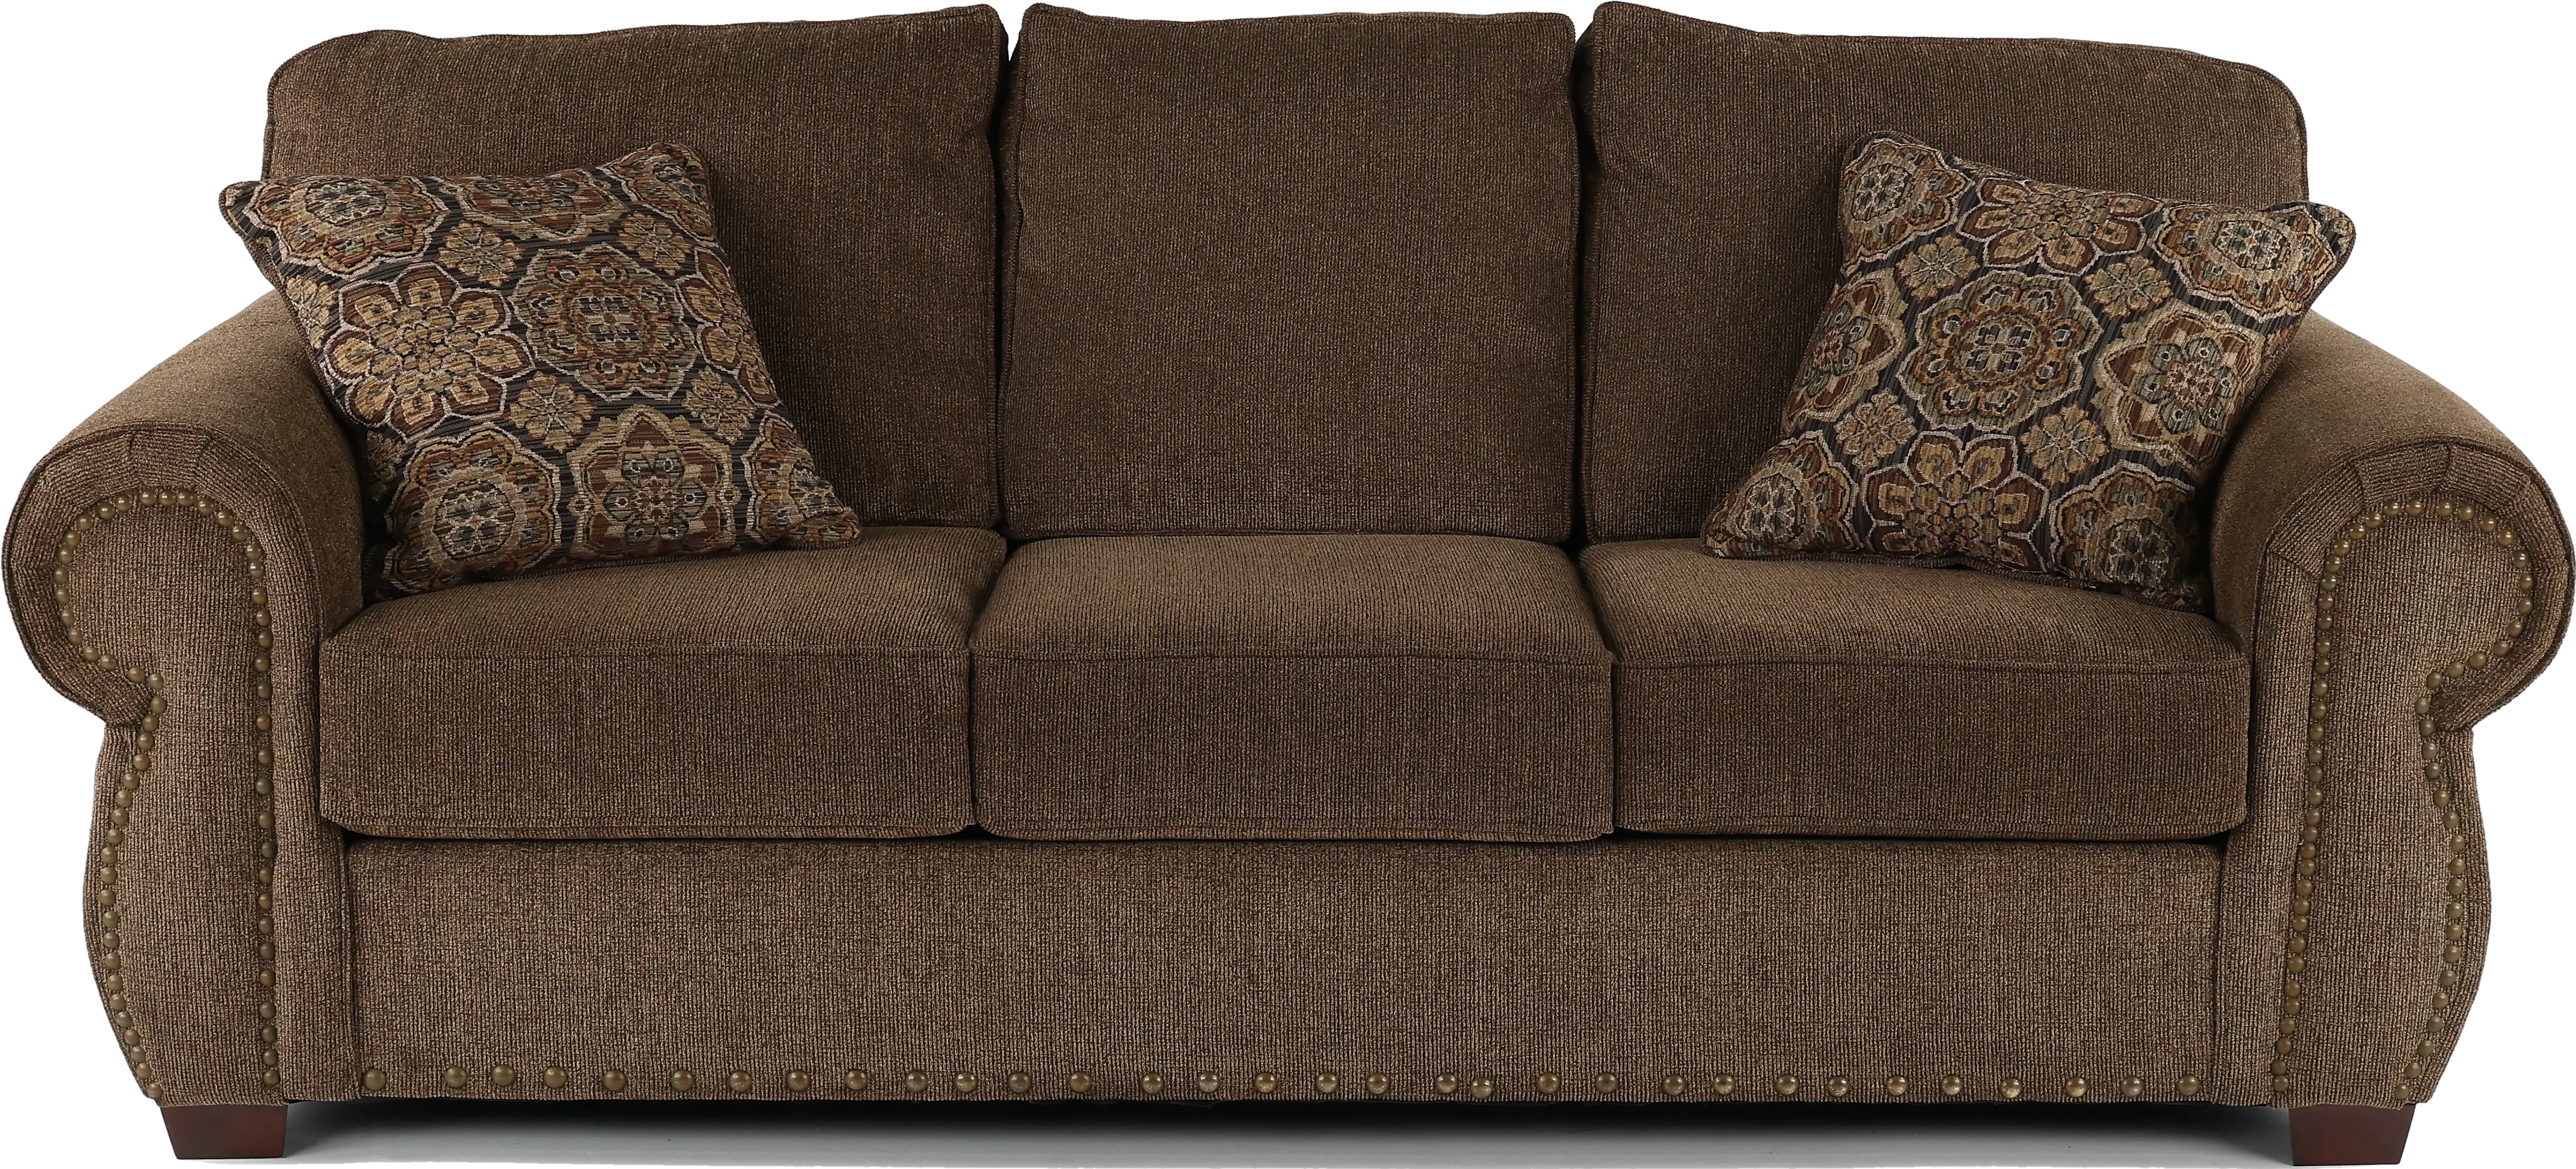 Southport Brown Sofa